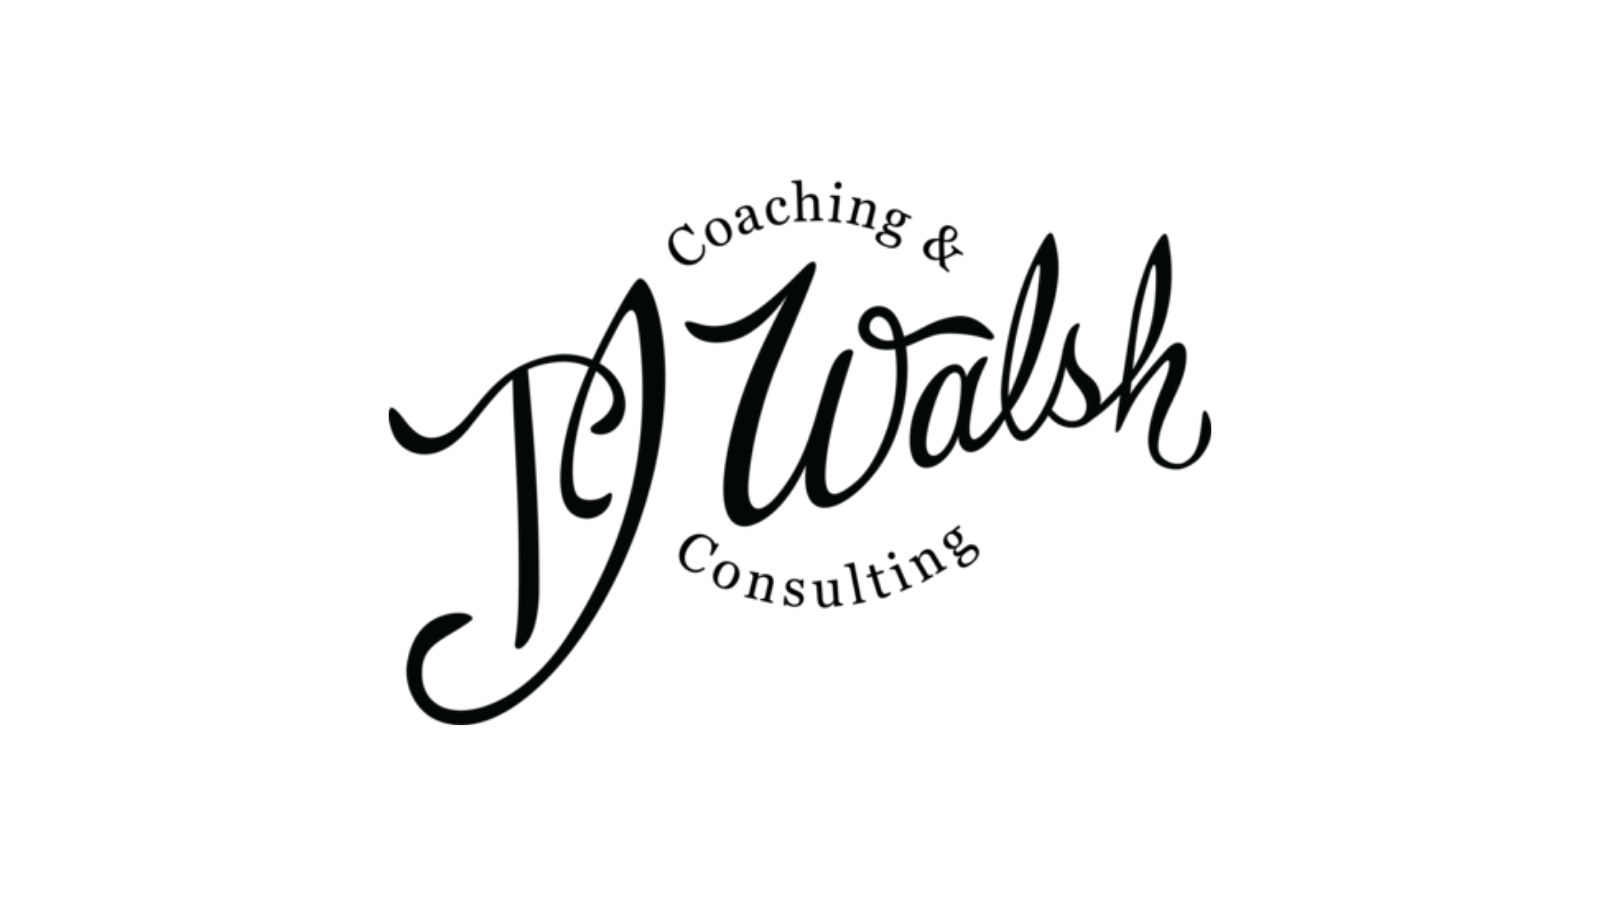 TJ Walsh Counseling